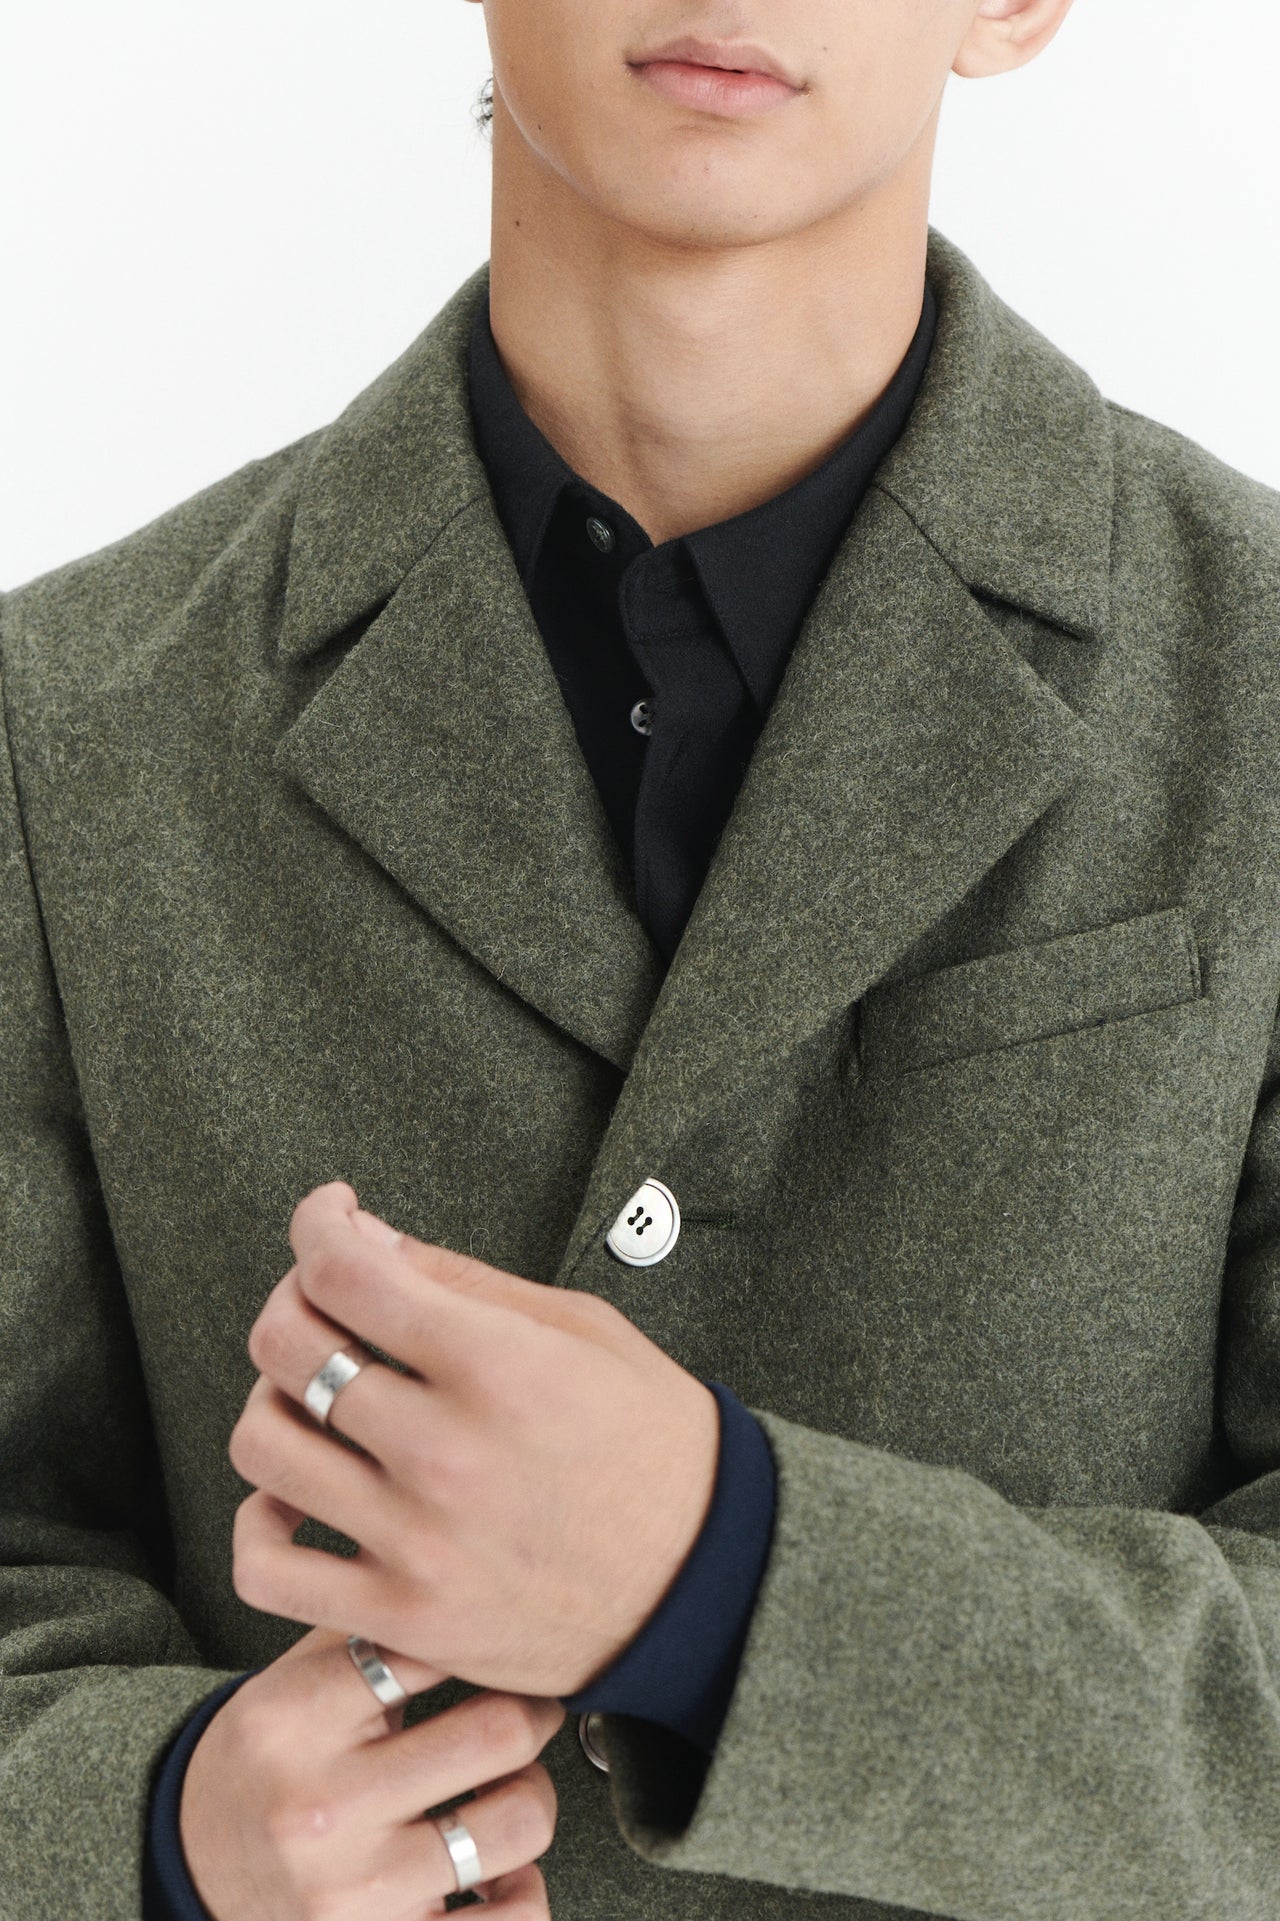 Biking Coat in a Moss Green Polish High End Sturdy Wool Broadcloth with MEIDA Thermo Insulation